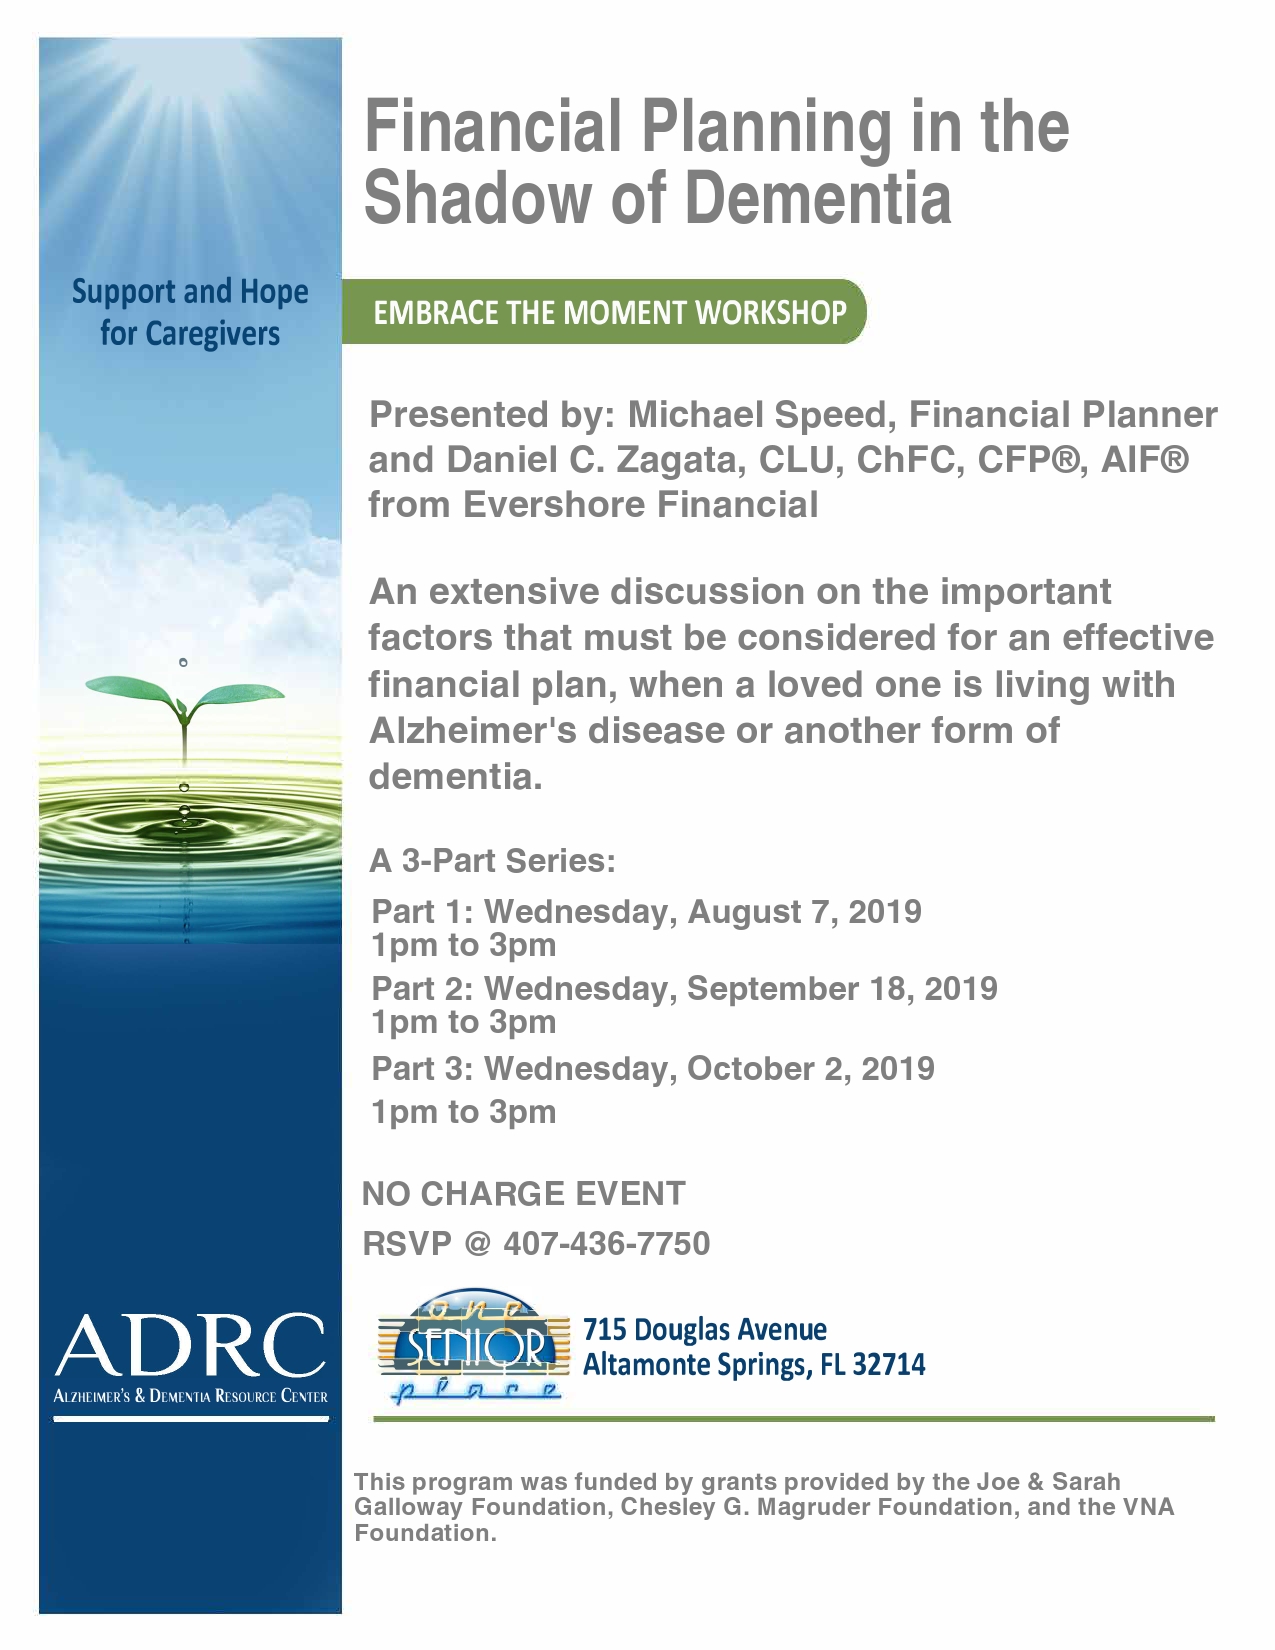 Part 2 - Financial Planning in the Shadow of Dementia